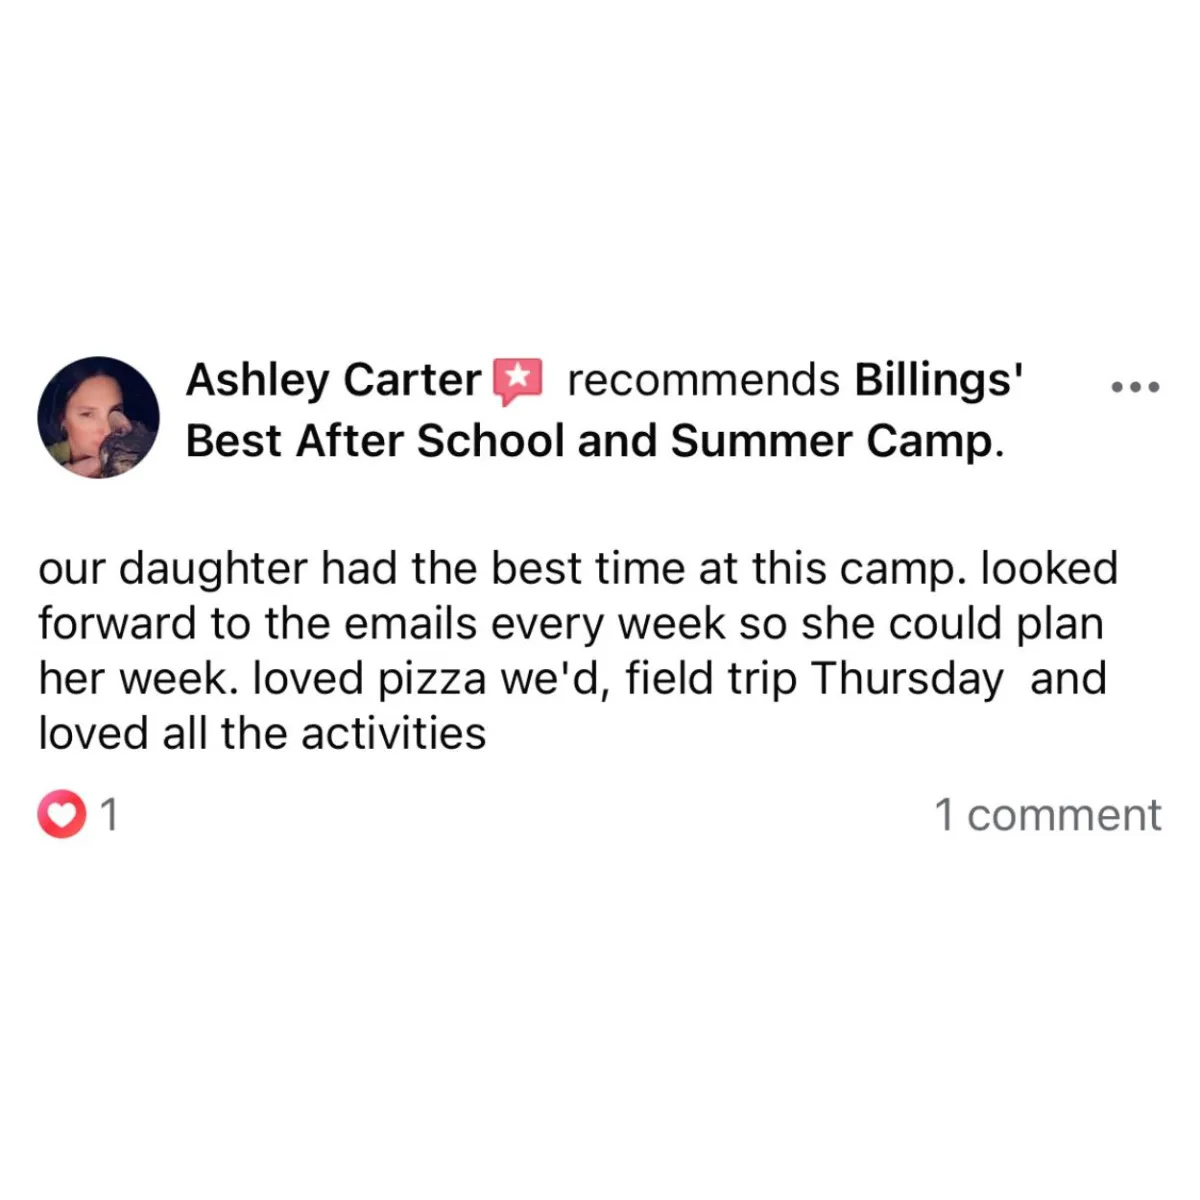 5 Star Review For Billings’ Best After School and Summer Camp